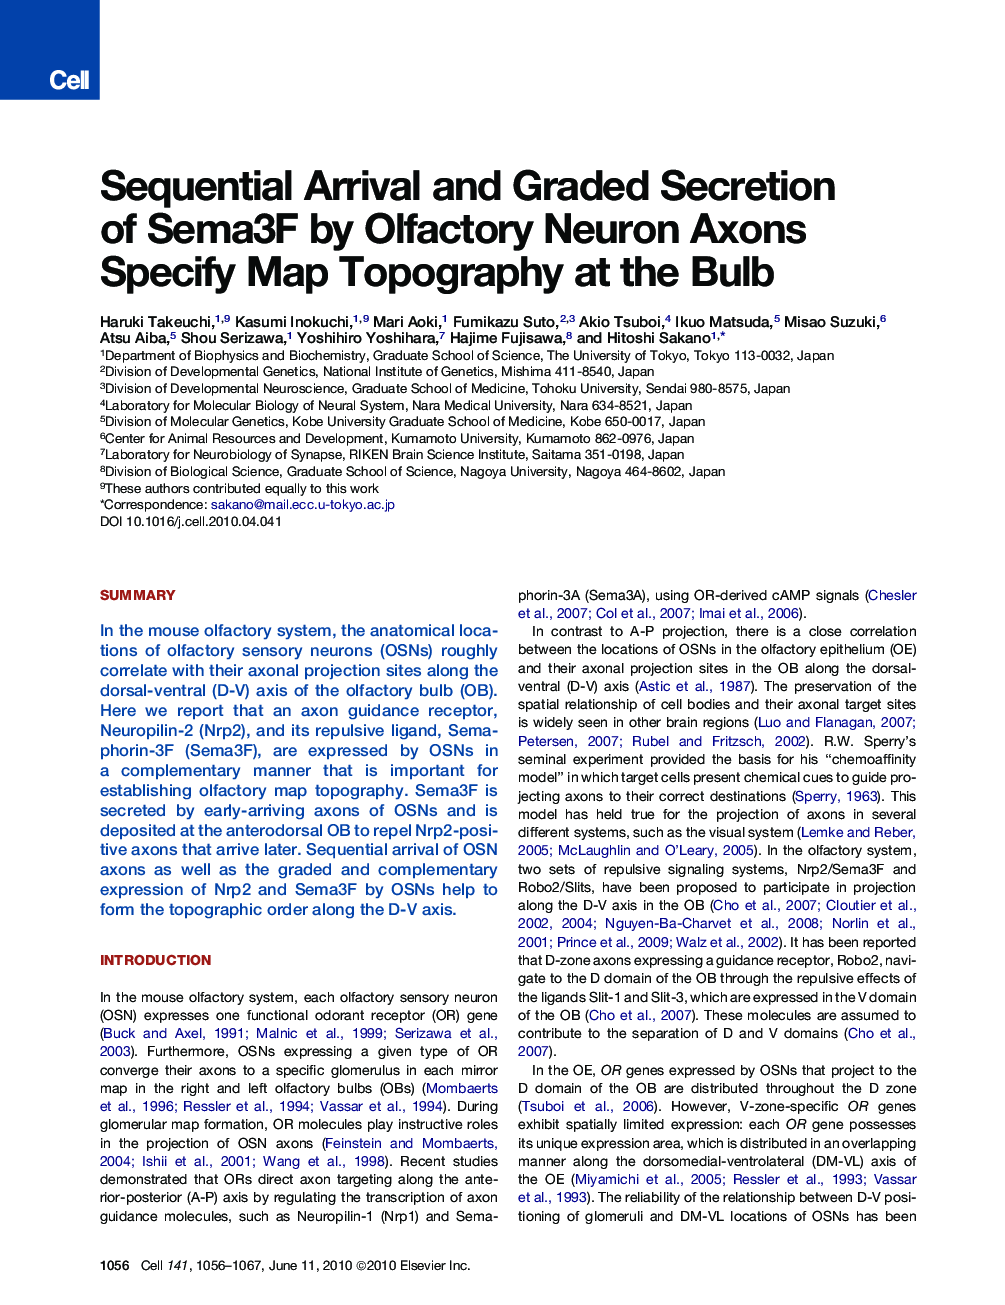 Sequential Arrival and Graded Secretion of Sema3F by Olfactory Neuron Axons Specify Map Topography at the Bulb